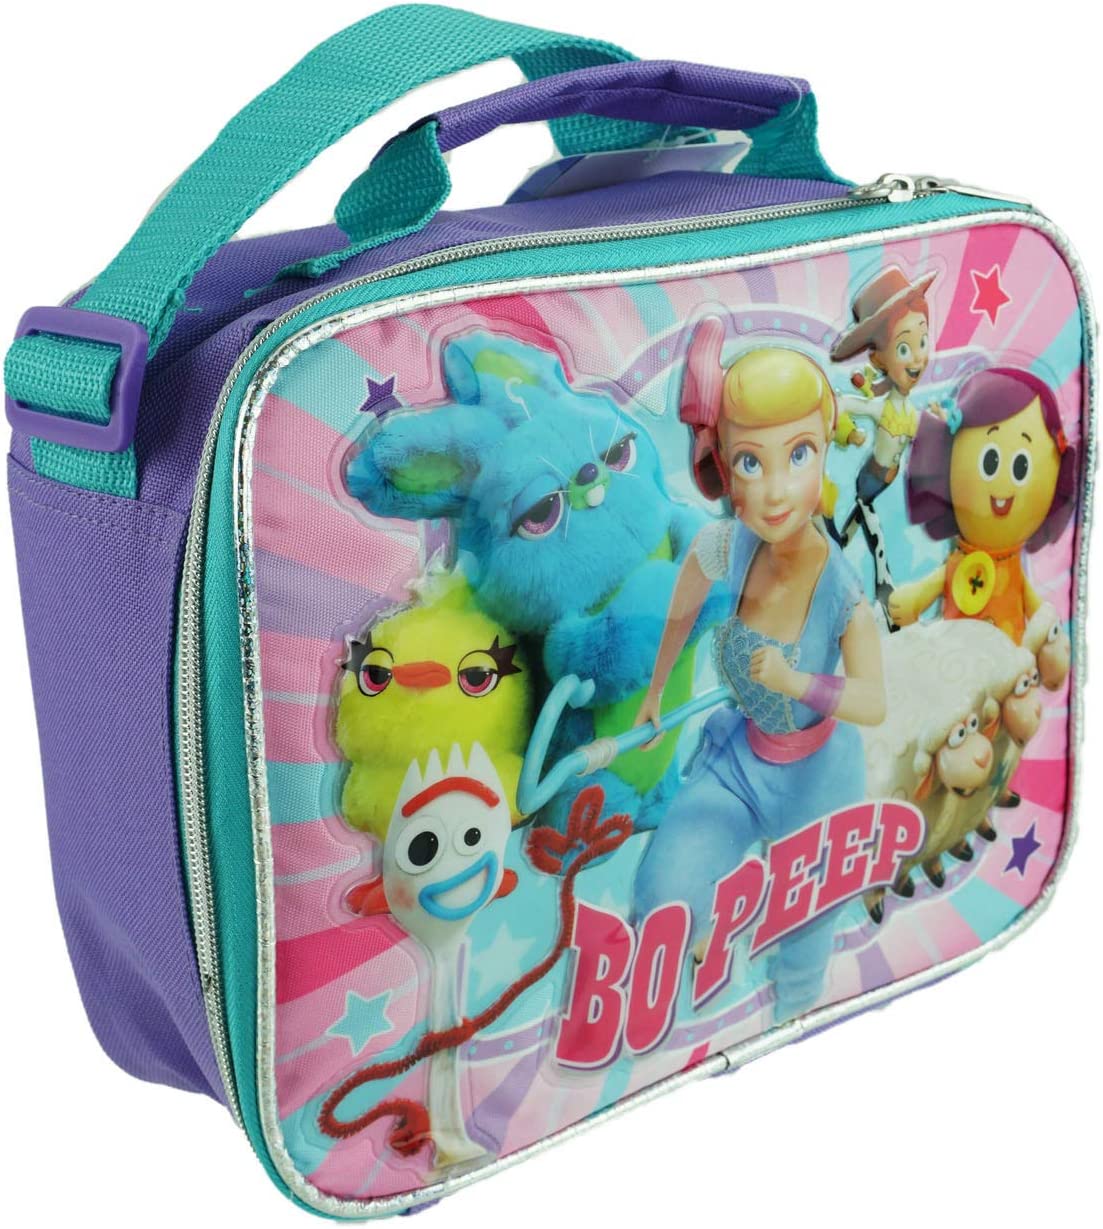 Toy Story 4 Insulated Lunch Box With Adjustable Shoulder Straps - Bo Peep - A17325